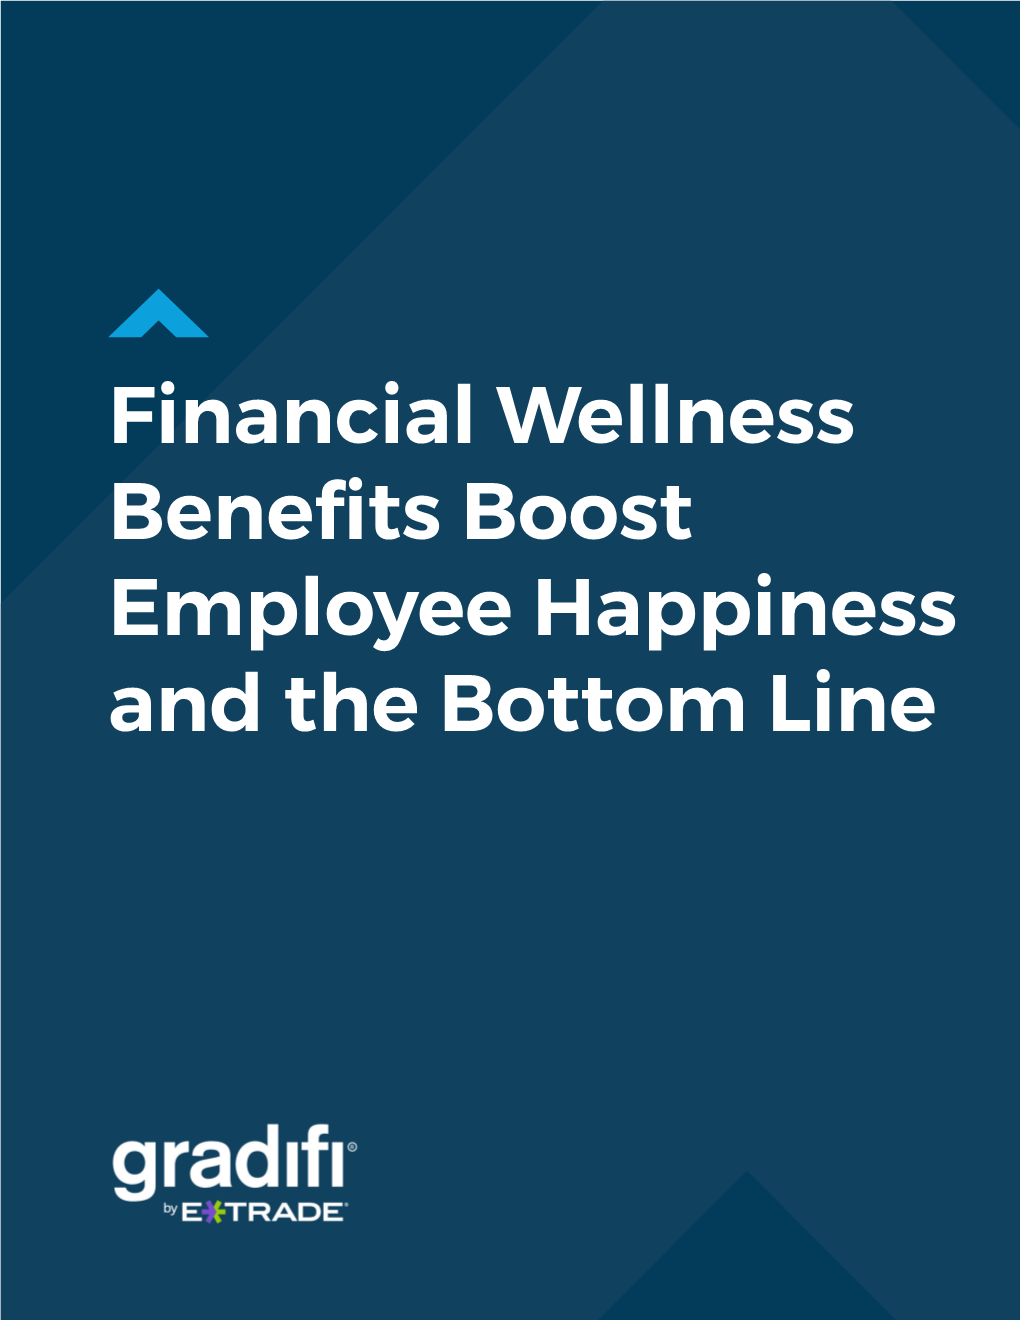 Financial Wellness Benefits Boost Employee Happiness and the Bottom Line